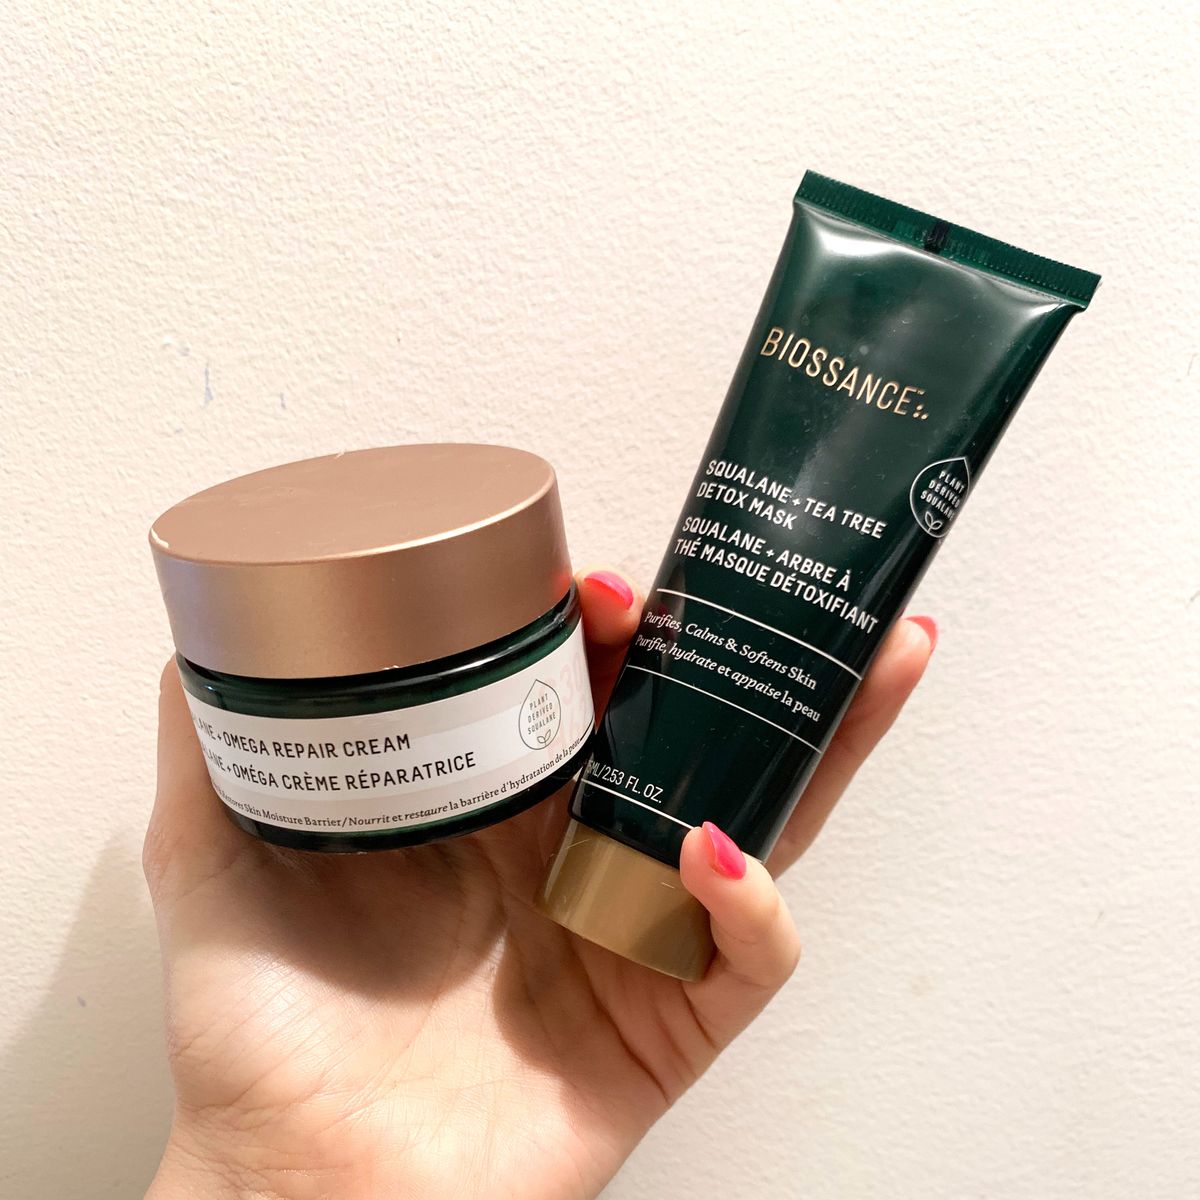 Biossance Repair Cream And Tea Tree Mask Review 2019 The